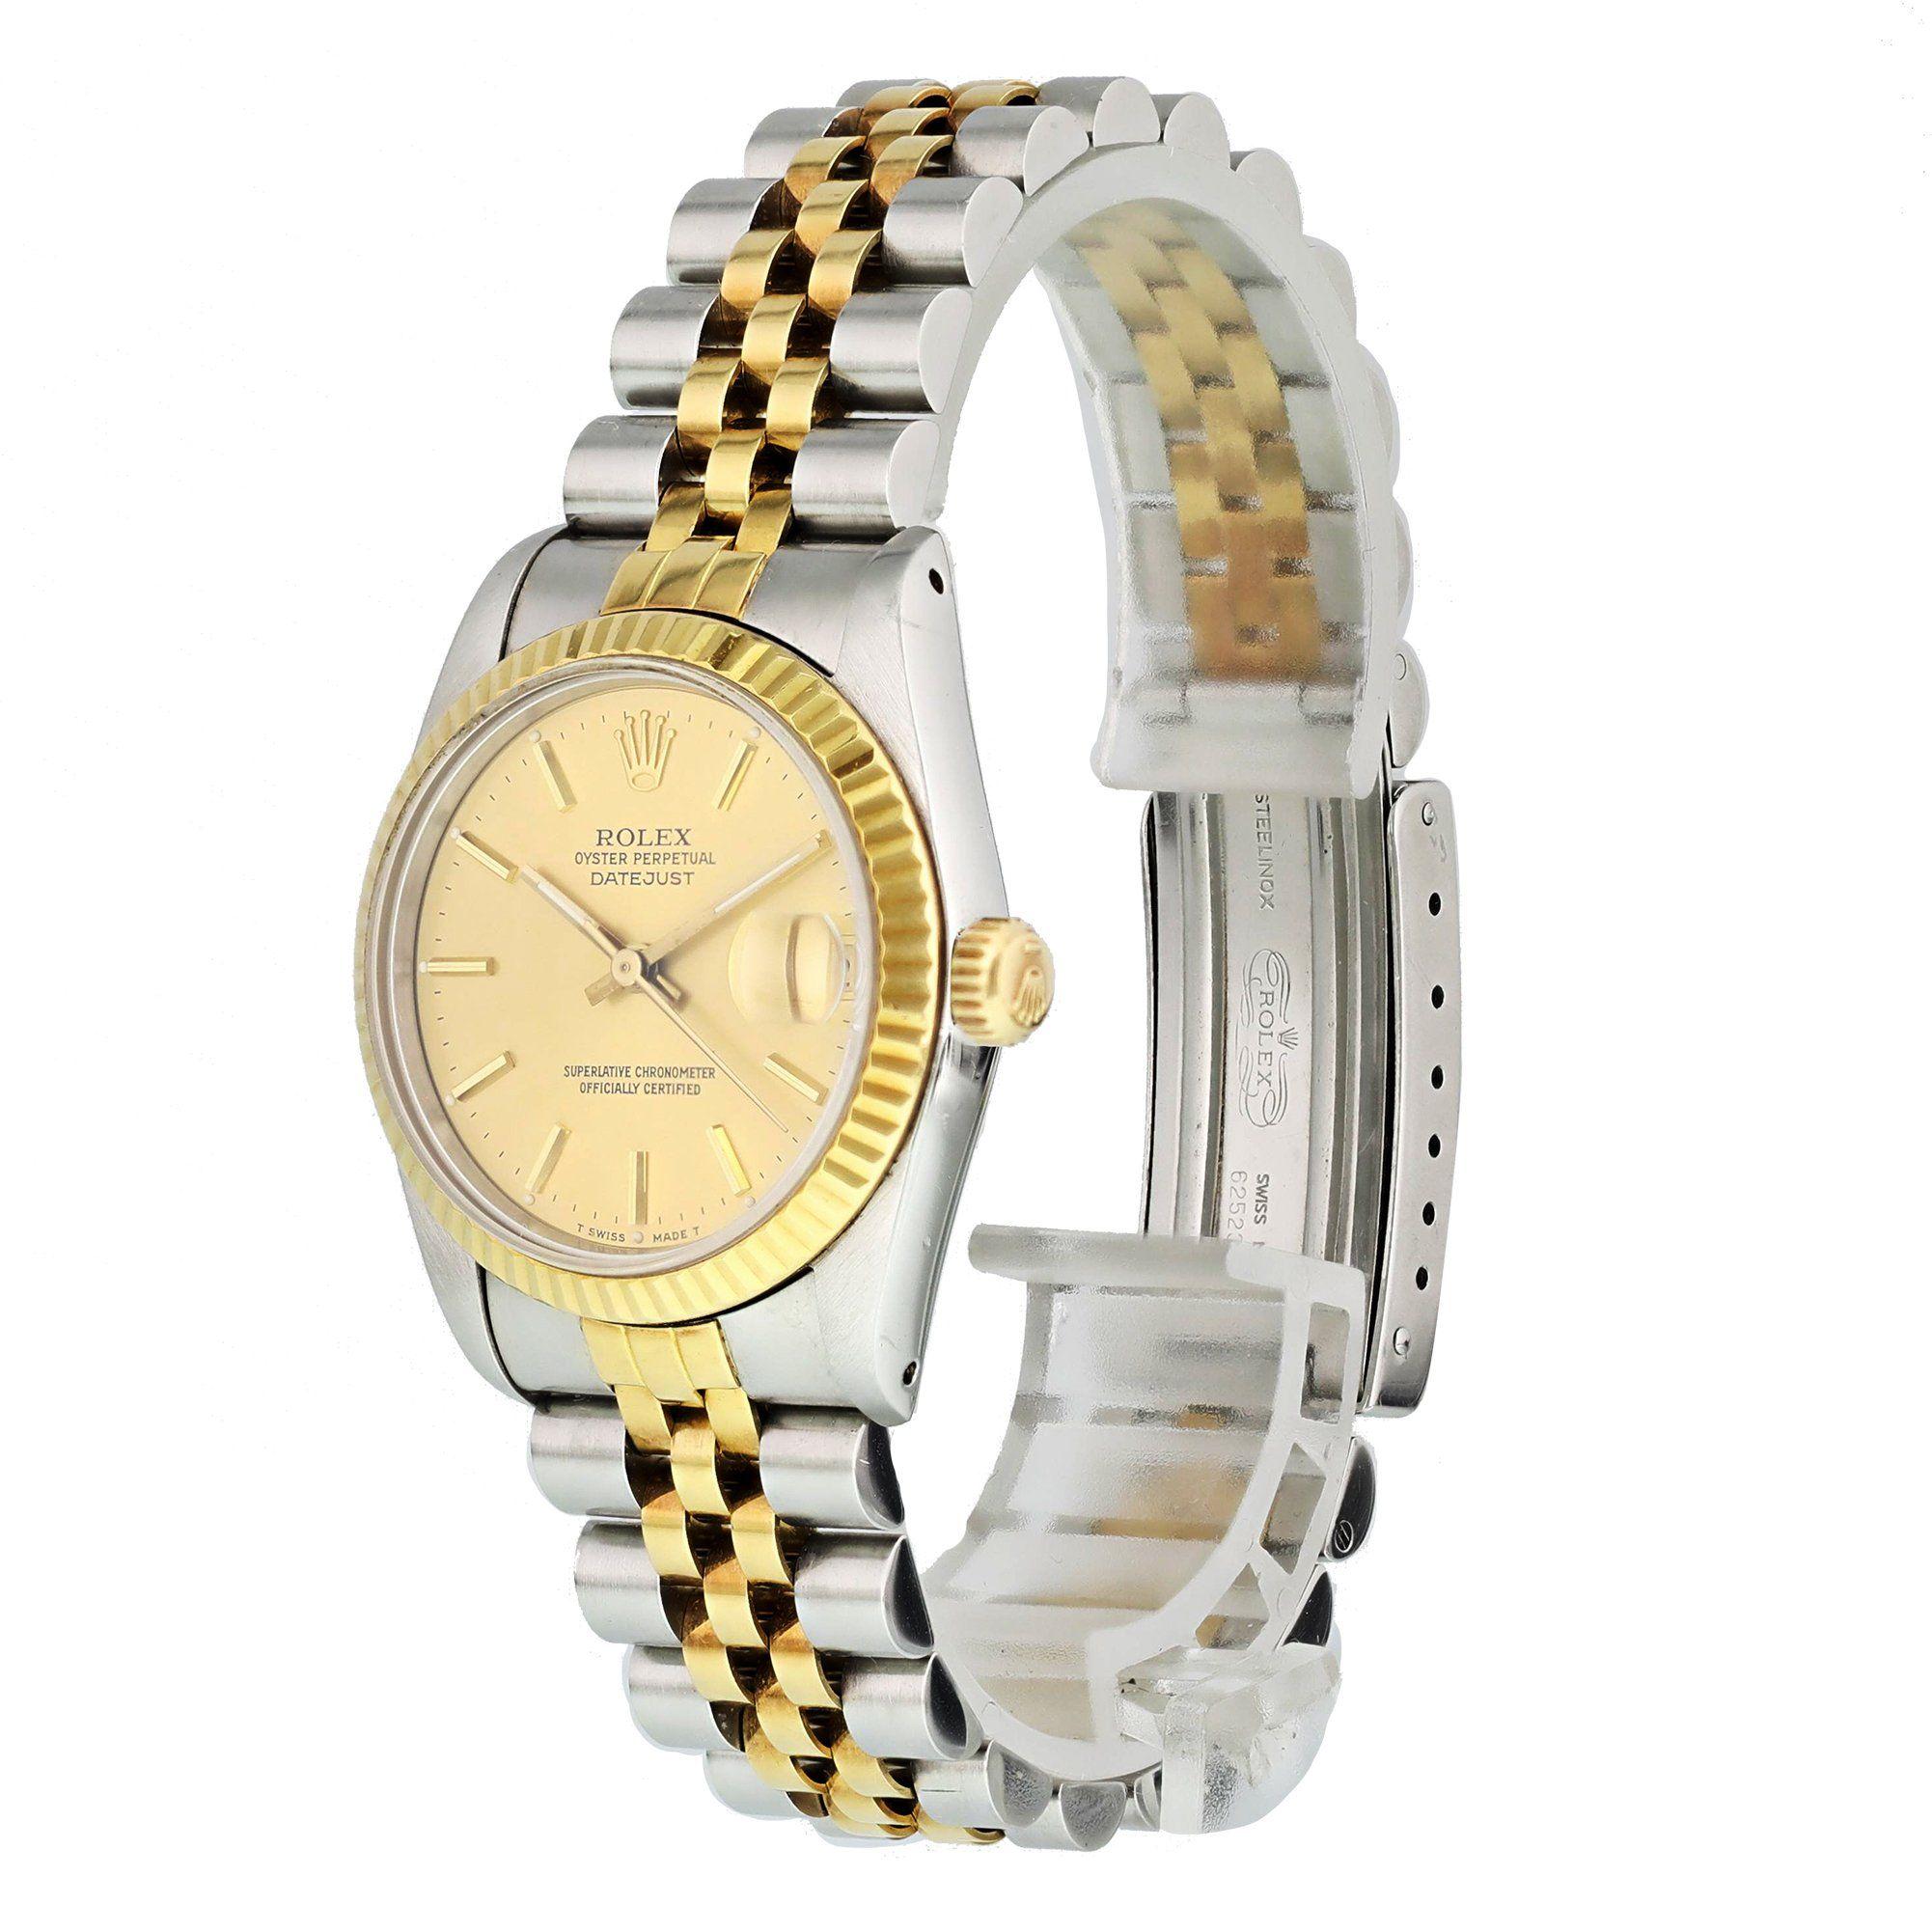 Rolex Datejust 68273 Midsize Ladies Watch. 
31mm Stainless Steel case. 
Yellow Gold Stationary fluted bezel. 
Champagne dial with gold hands and index hour markers. 
Minute markers on the outer dial. 
Date display at the 3 o'clock position.